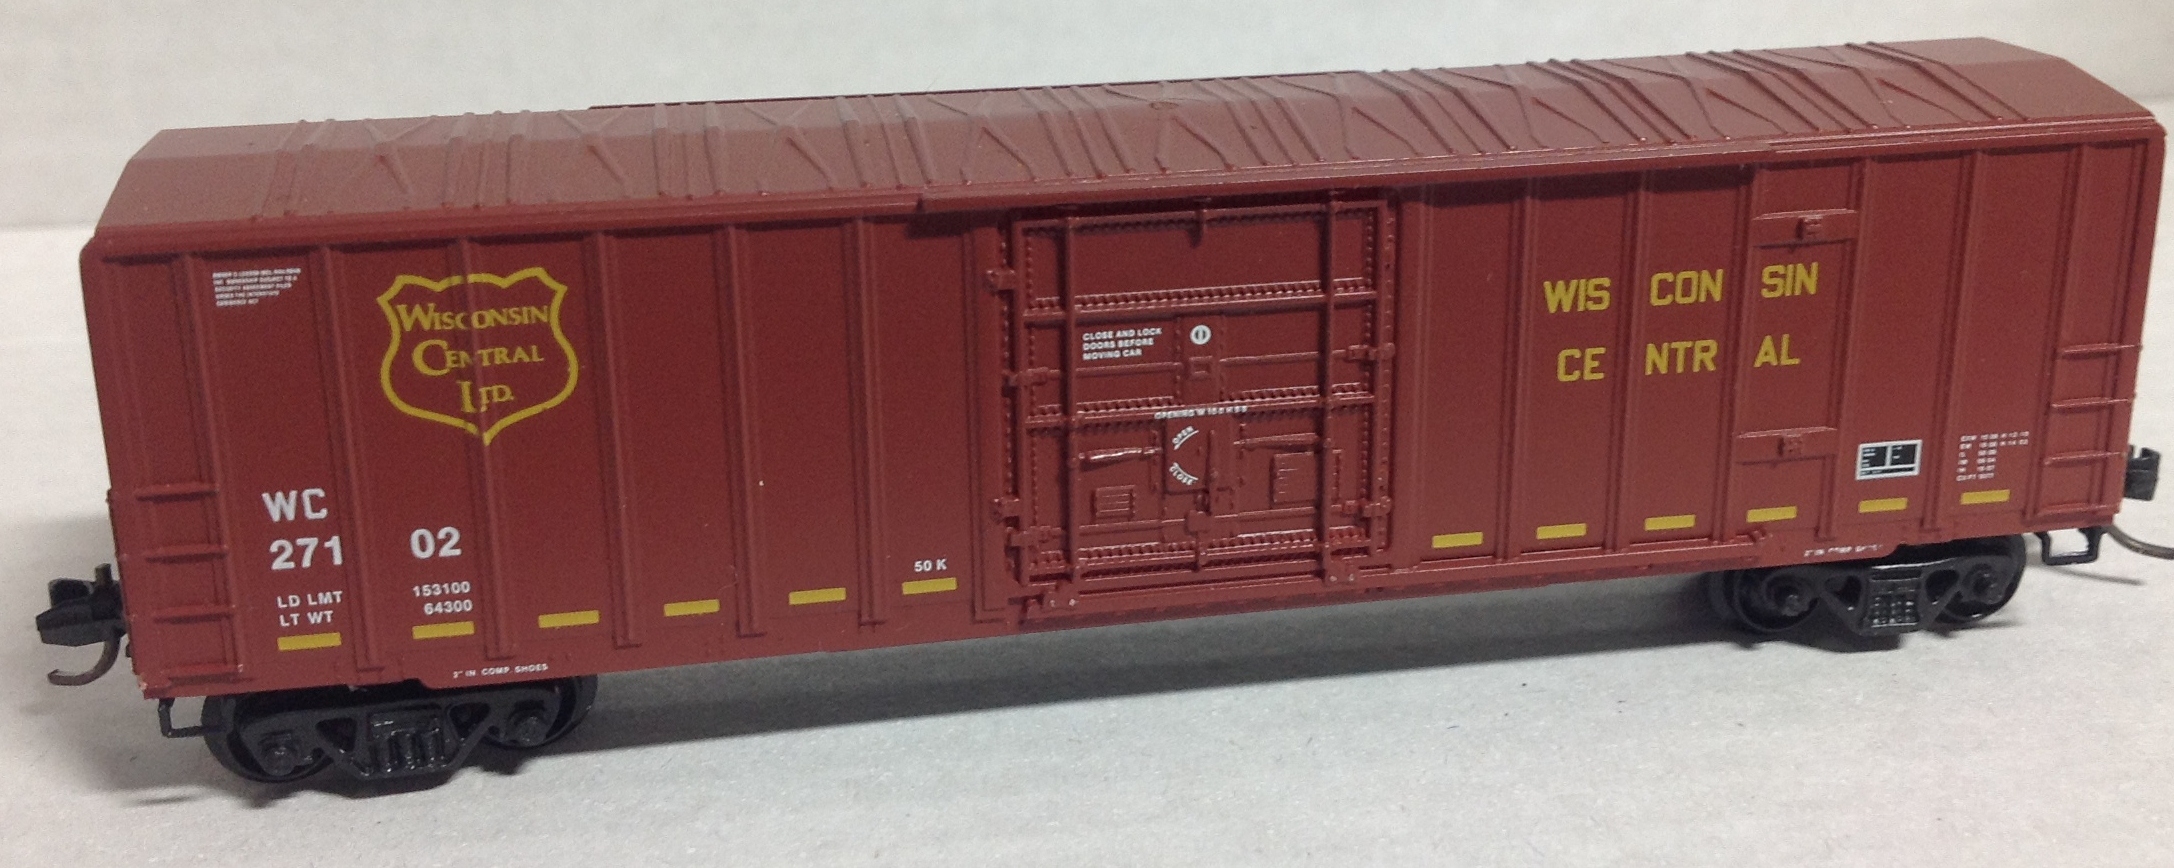 27210 WISCONSIN CENTRAL 26173 MR 60  ~ 50' BOXCAR  ~  MTL  MICRO TRAINS N SCALE 